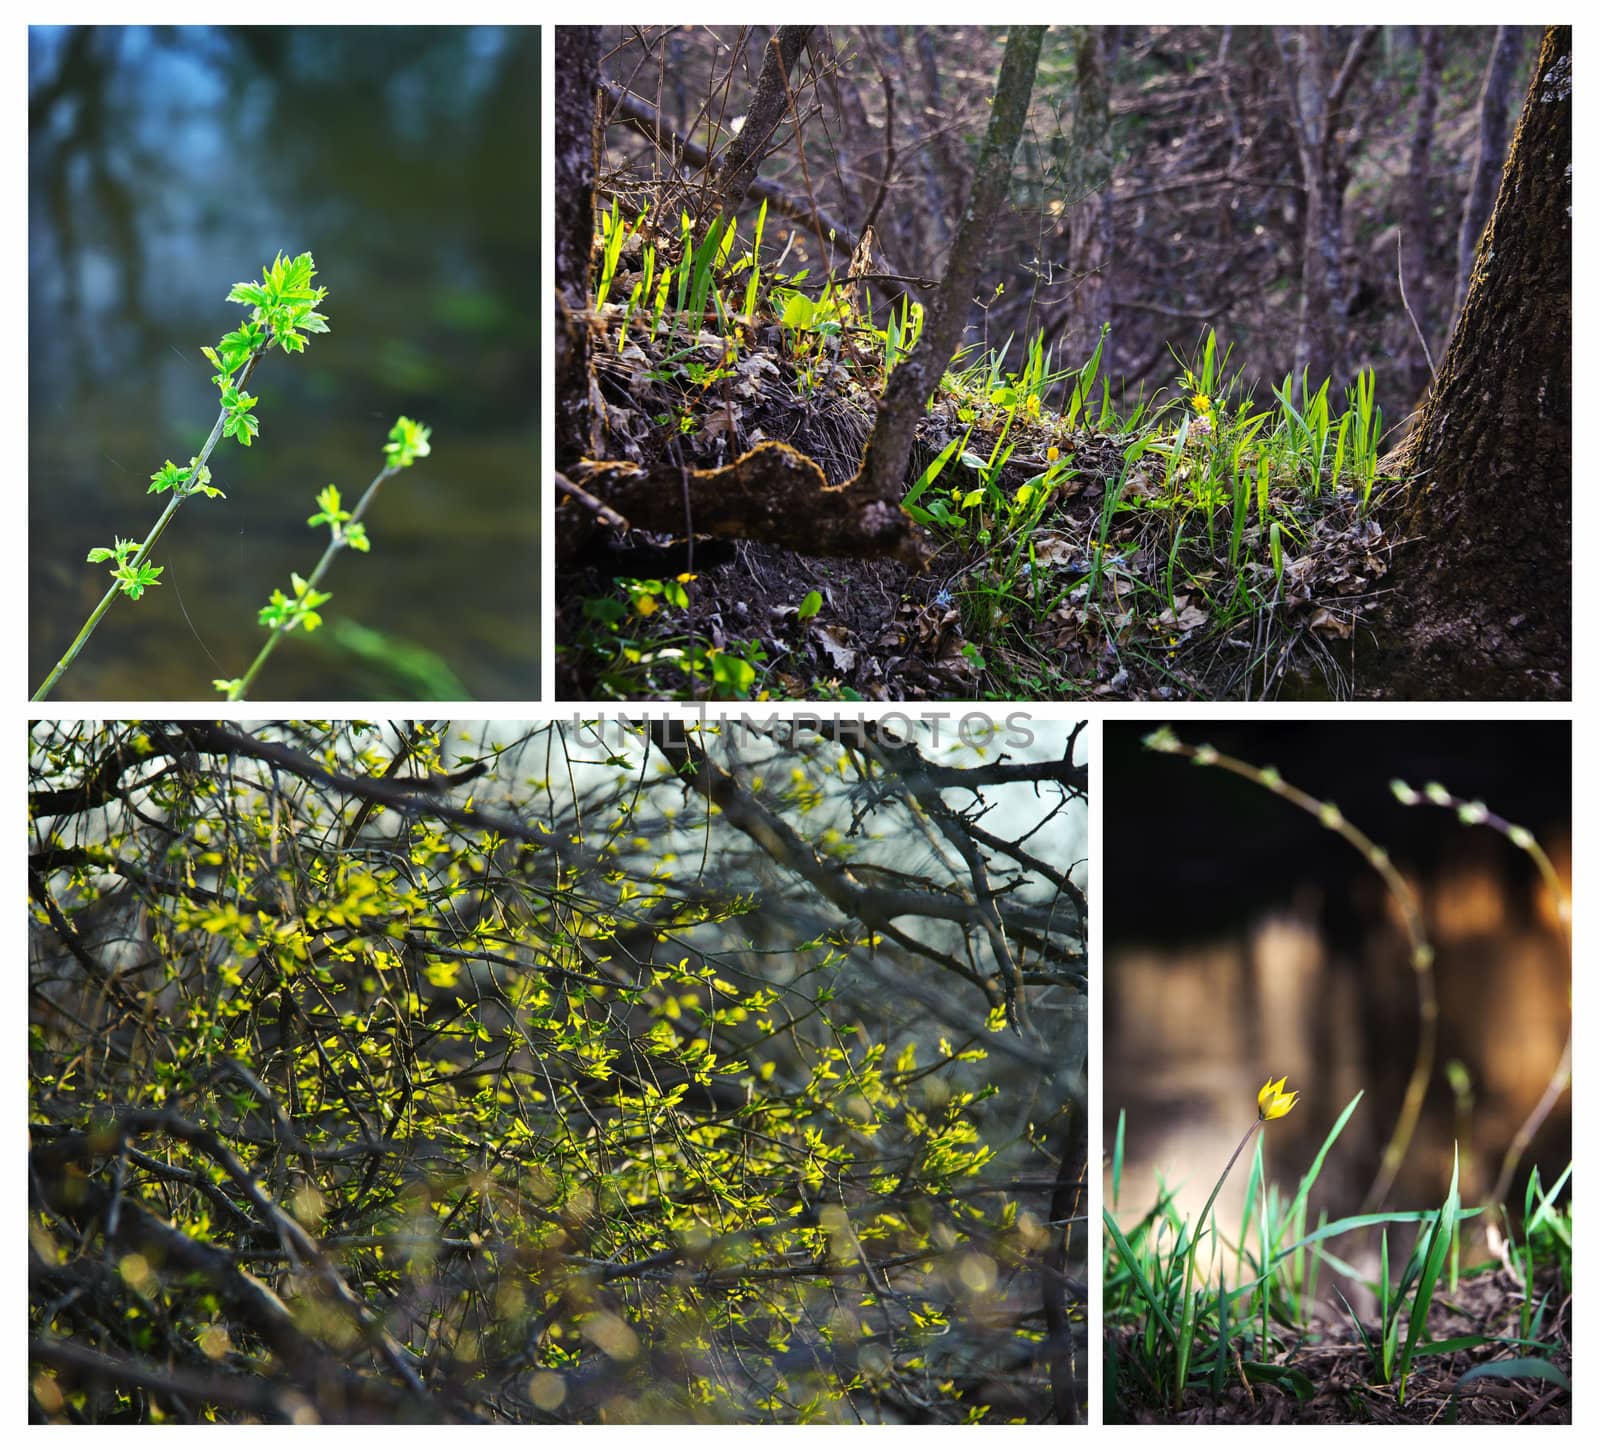 Young, fresh grass, flowers and foliage in the forest. Spring, nature wakes up. Collage.